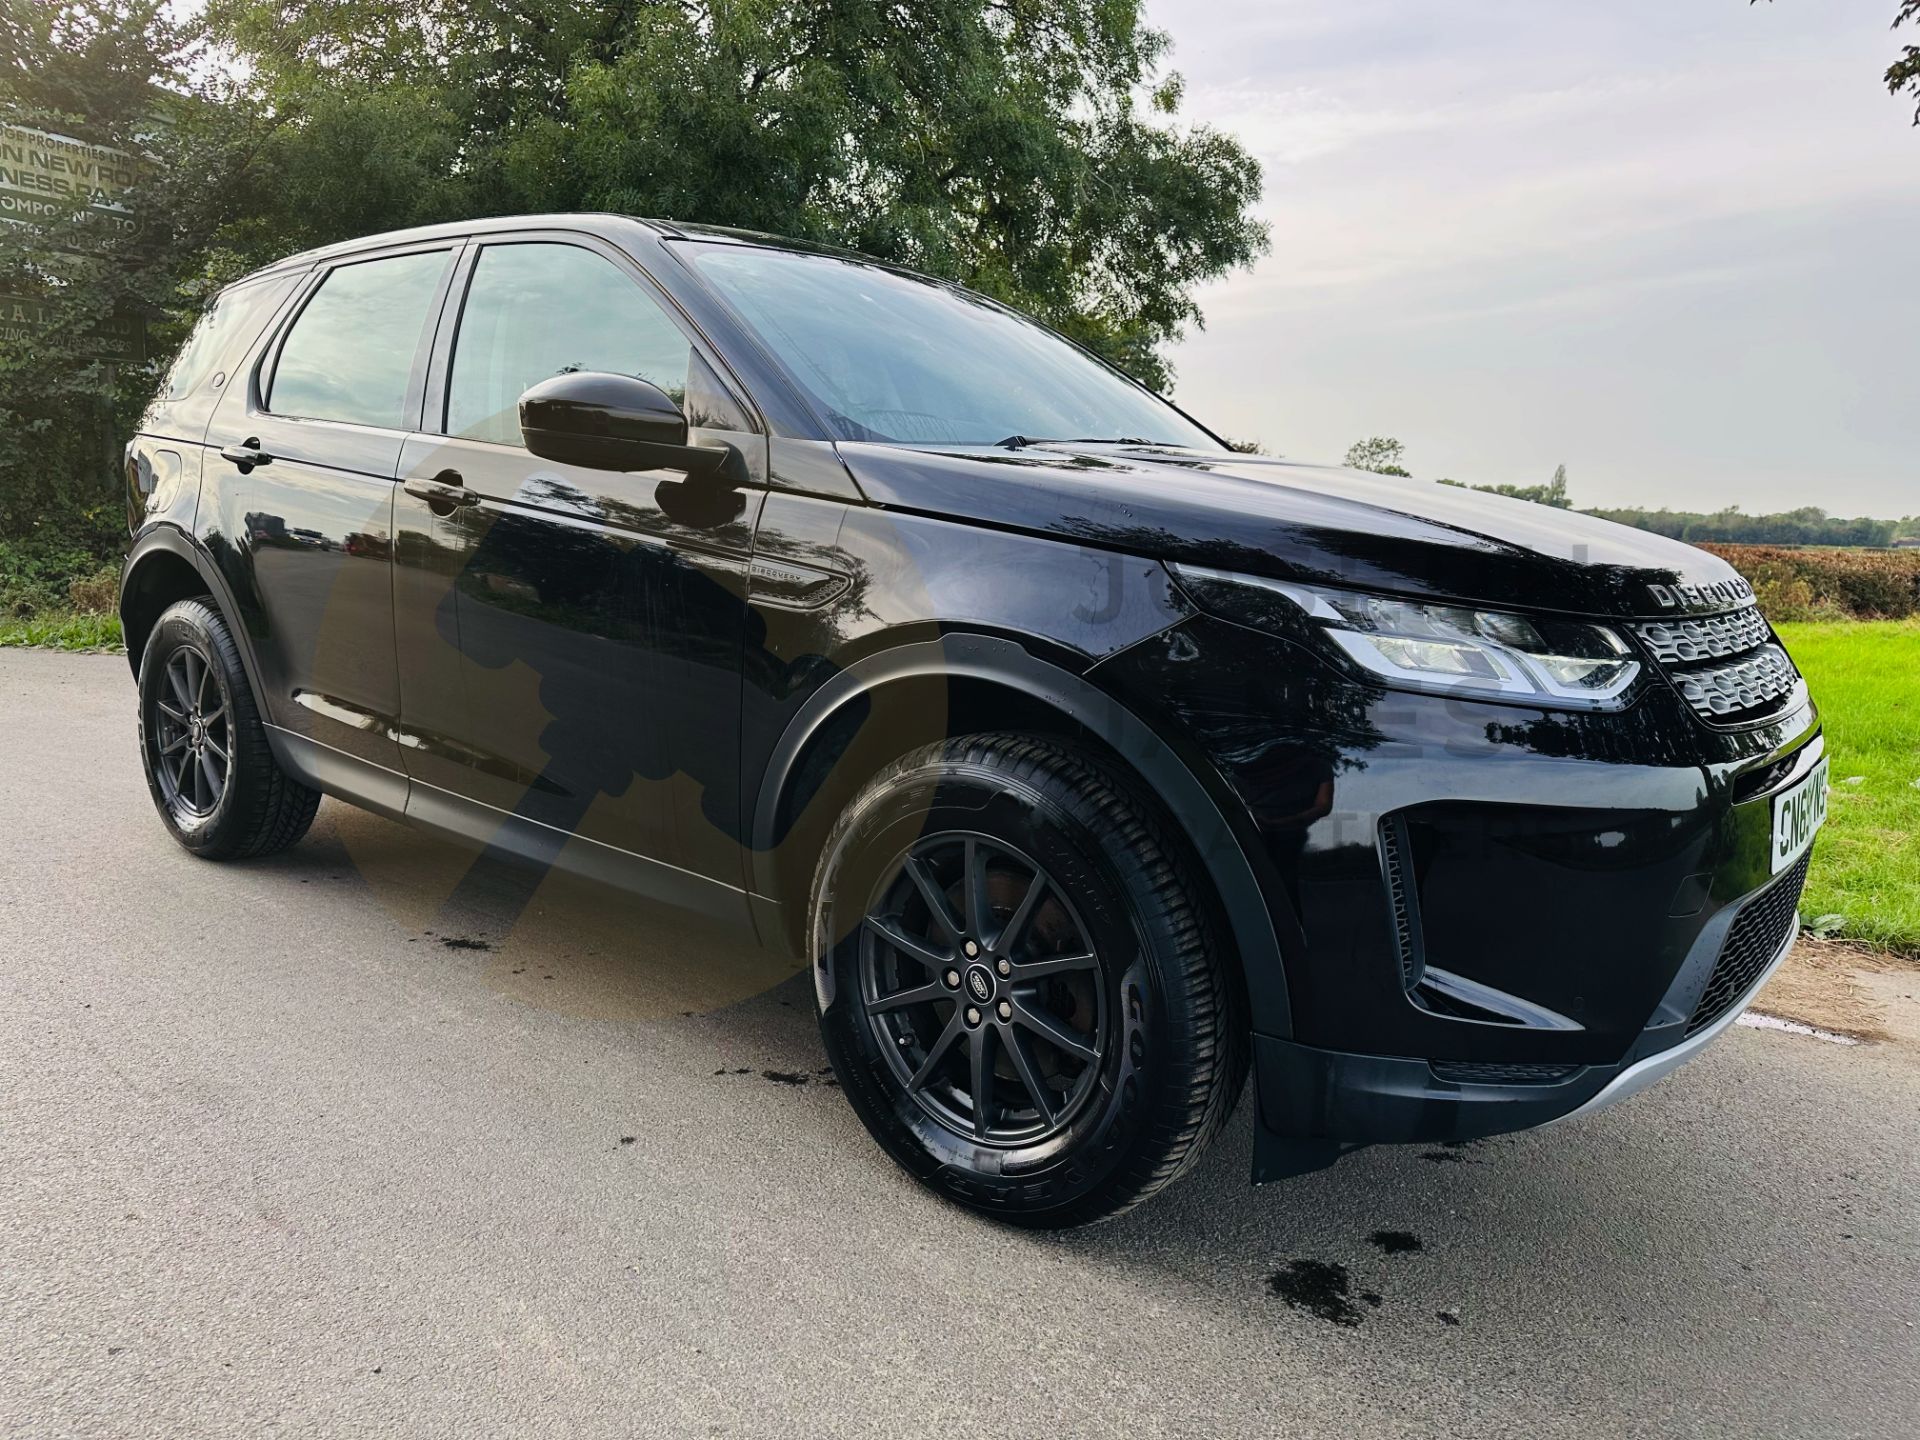 ON SALE LAND ROVER DISCOVERY SPORT (69 REG) - *2020 FACELIFT MODEL* - 1 OWNER FROM NEW - Image 2 of 39